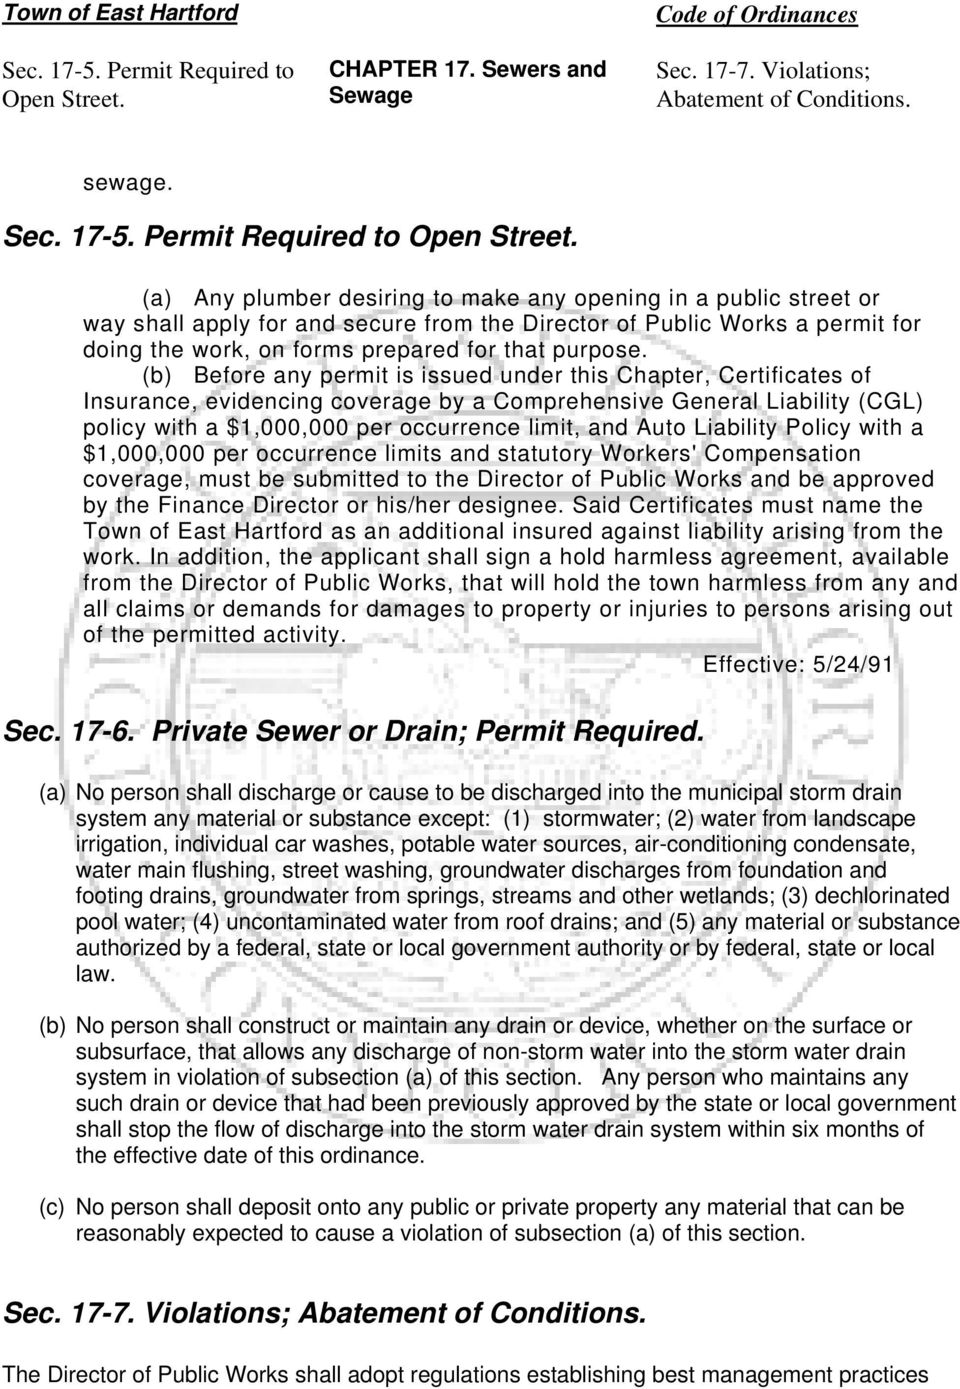 (a) Any plumber desiring to make any opening in a public street or way shall apply for and secure from the Director of Public Works a permit for doing the work, on forms prepared for that purpose.